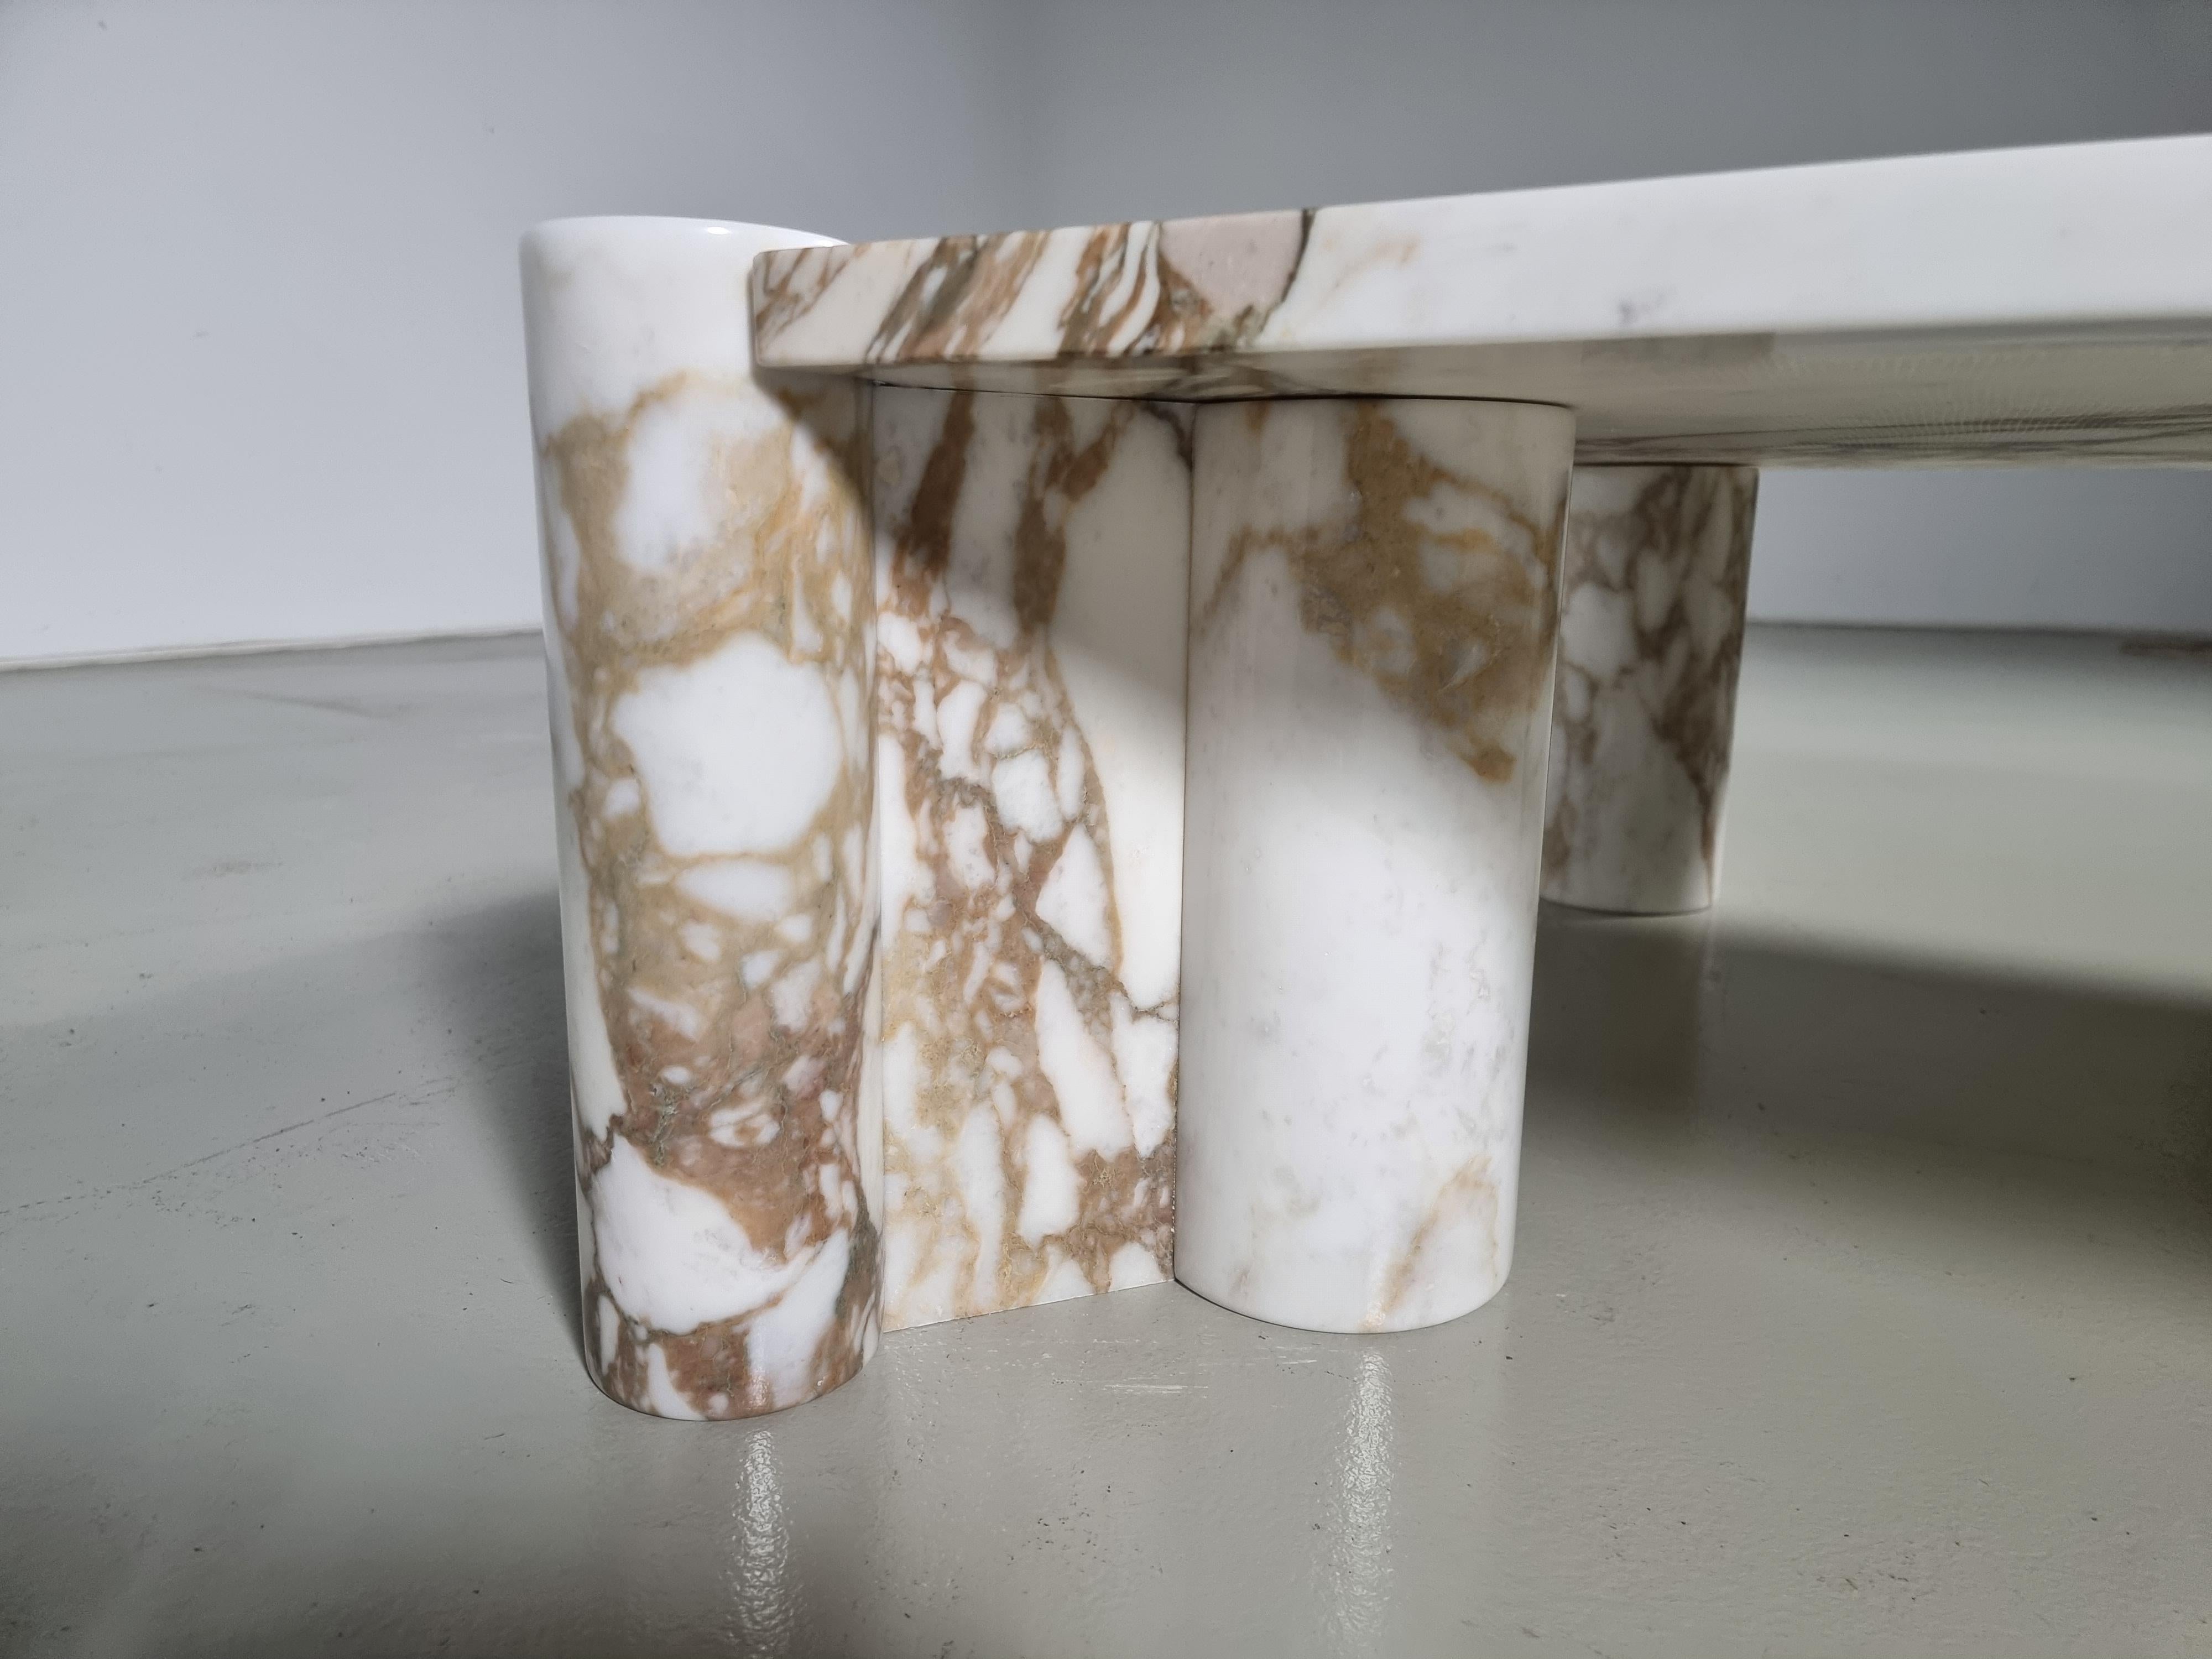 Marble Jumbo Coffee Table by Gae Aulenti for Knoll International